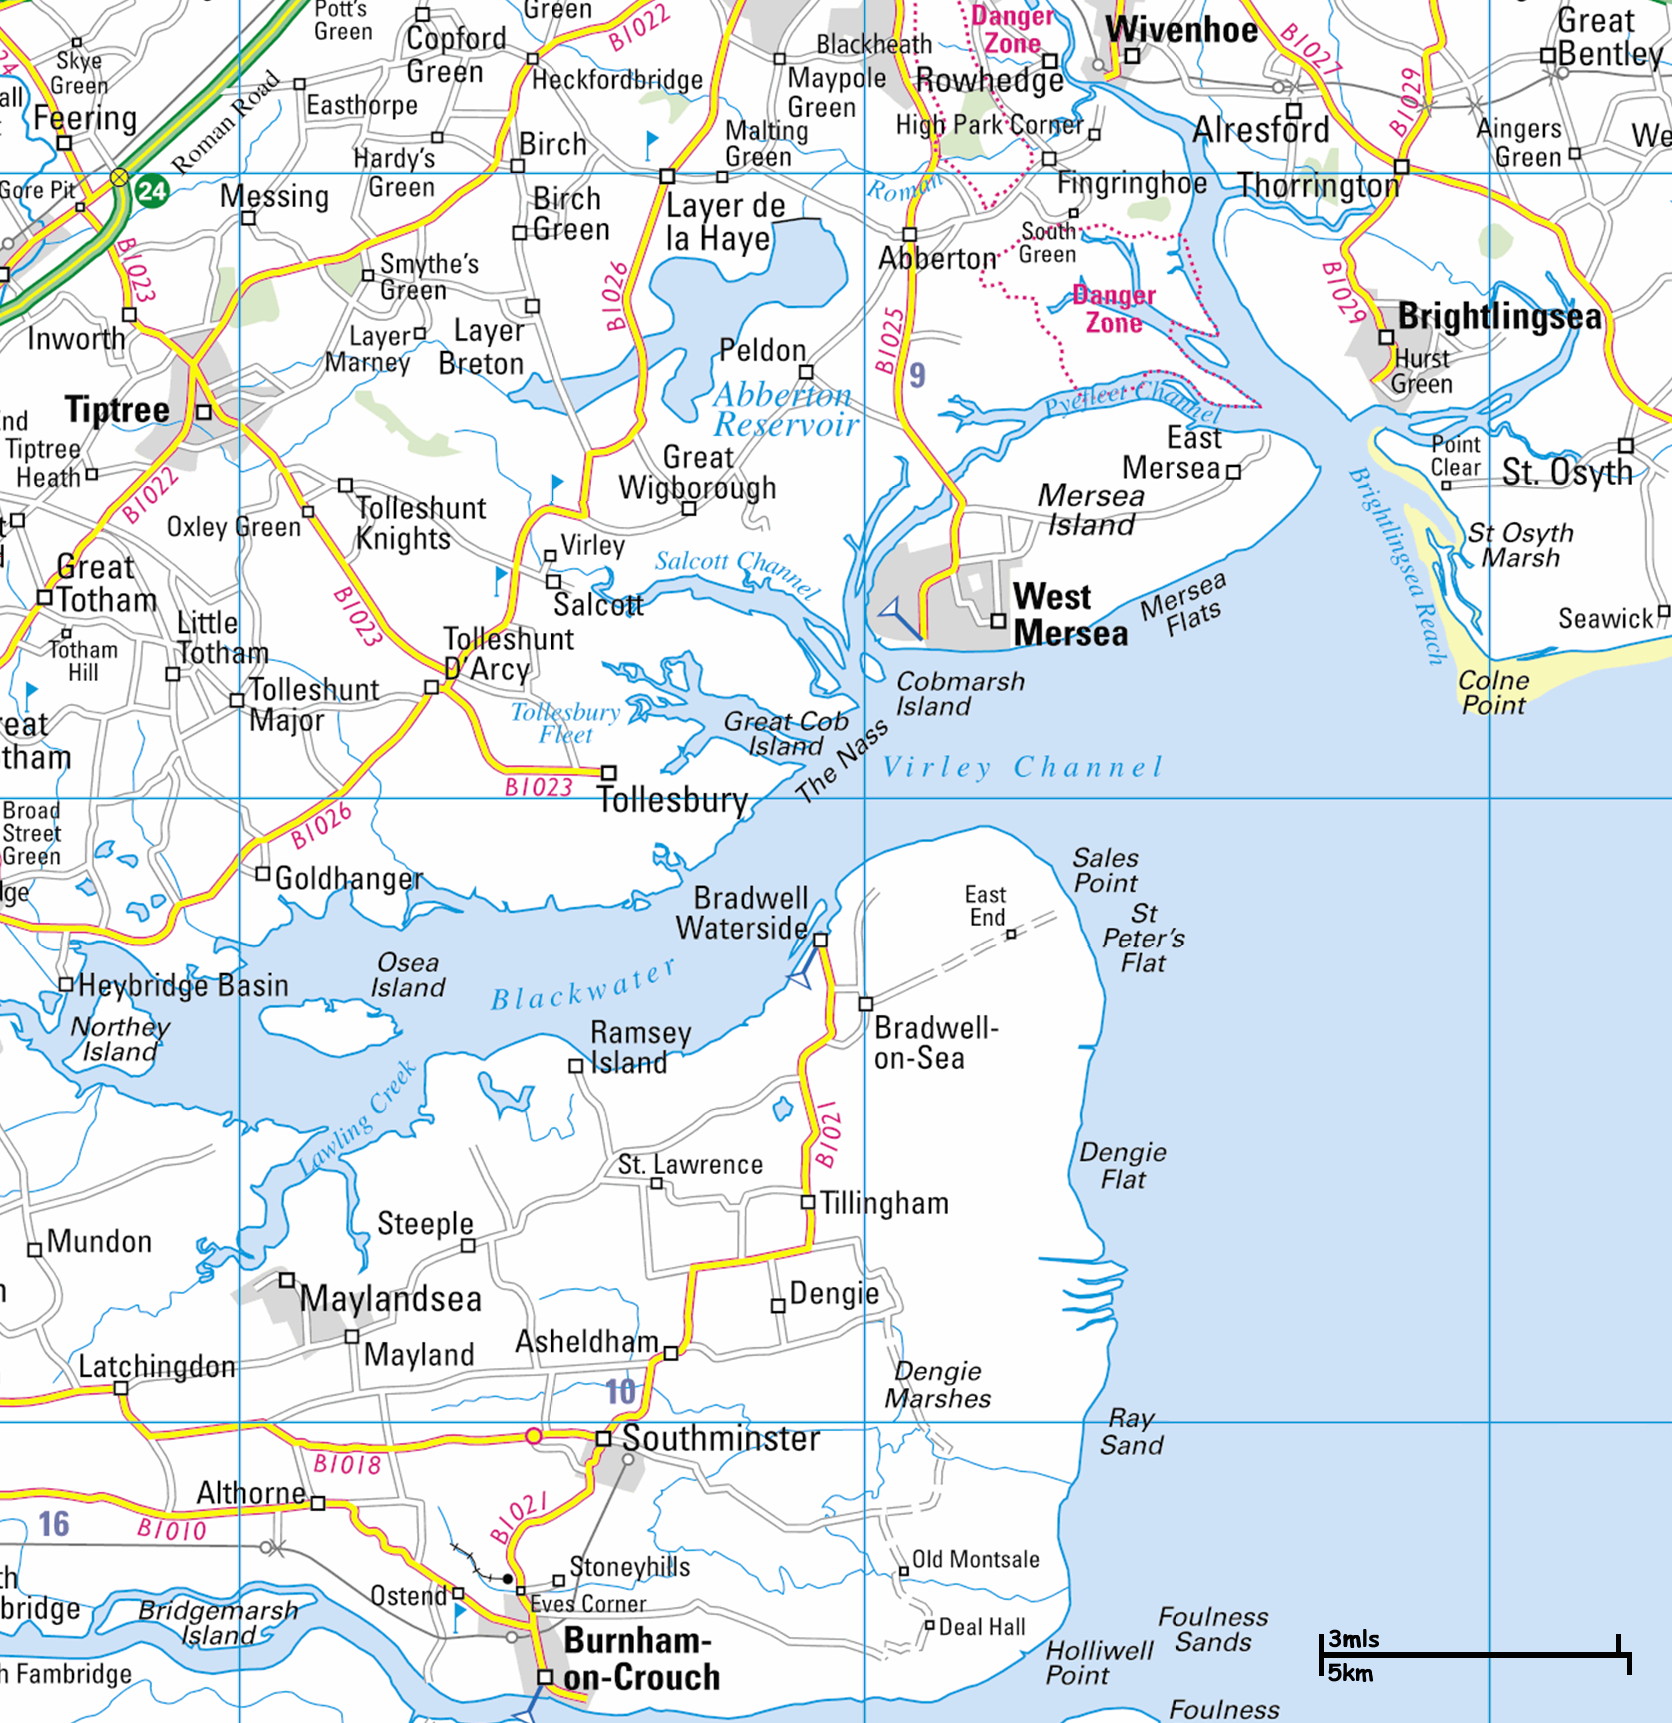 map of the area around the Blackwater Estuary